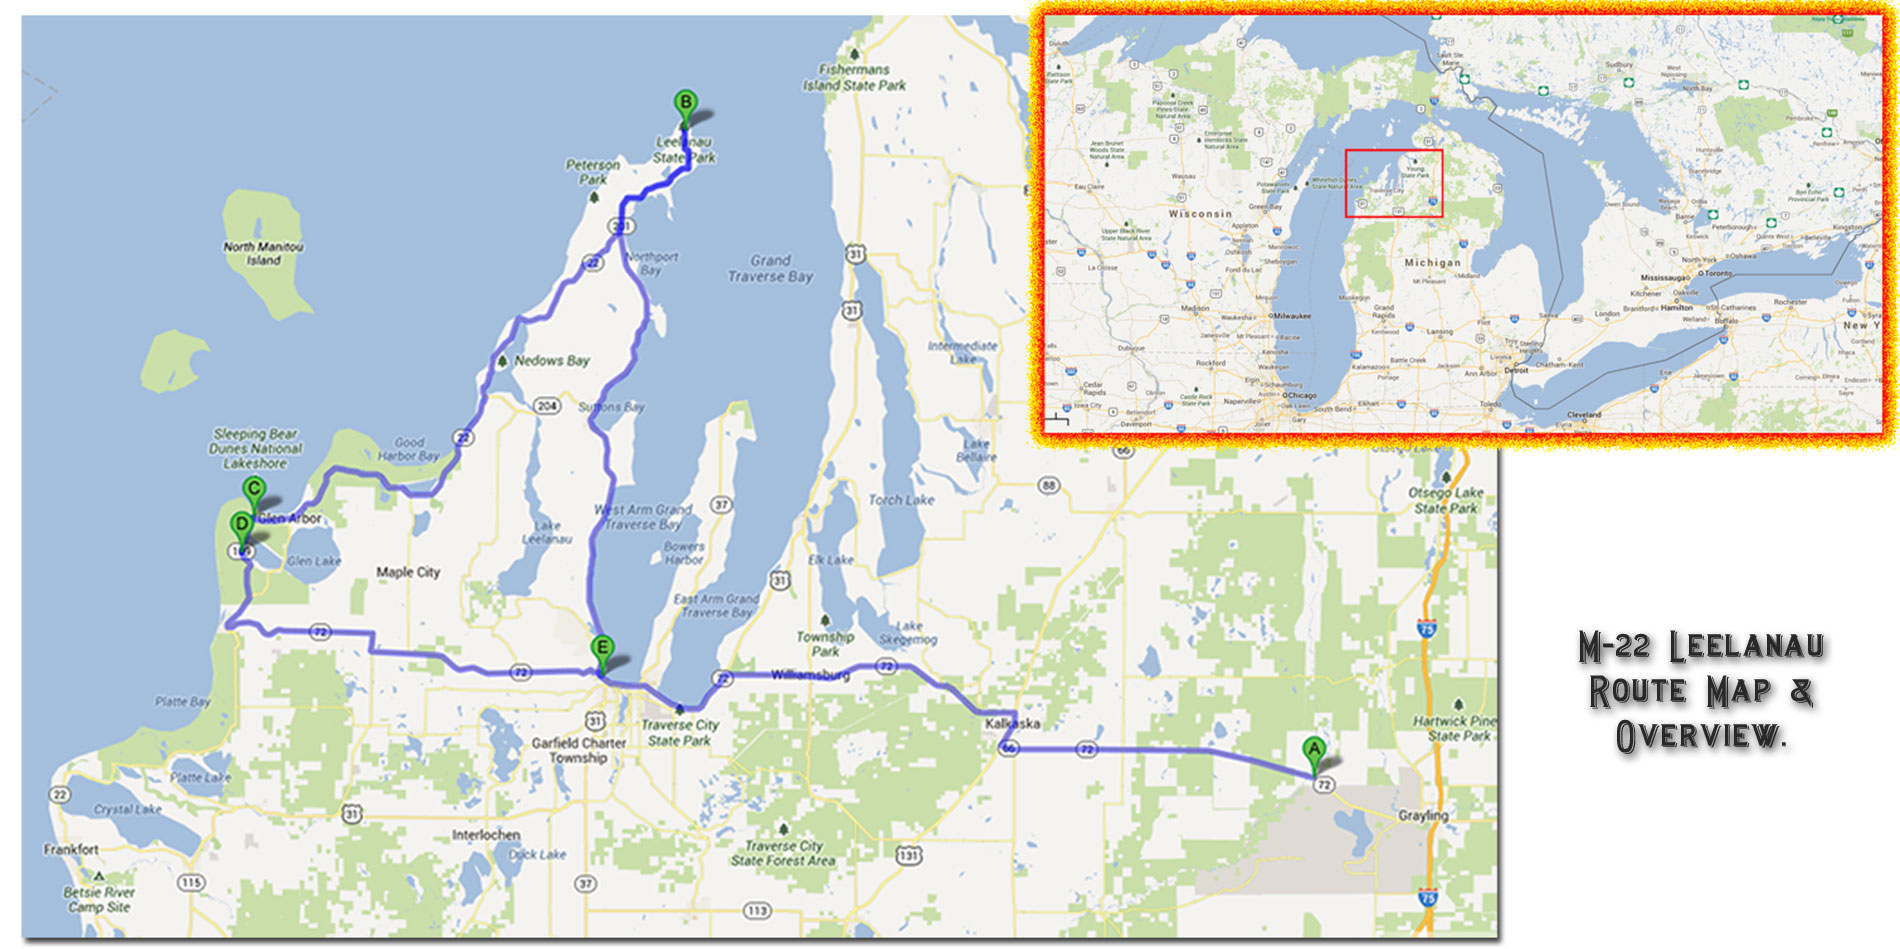 Here is an overview/ loacation map and one of the route we took on our 'Sunday Drive'